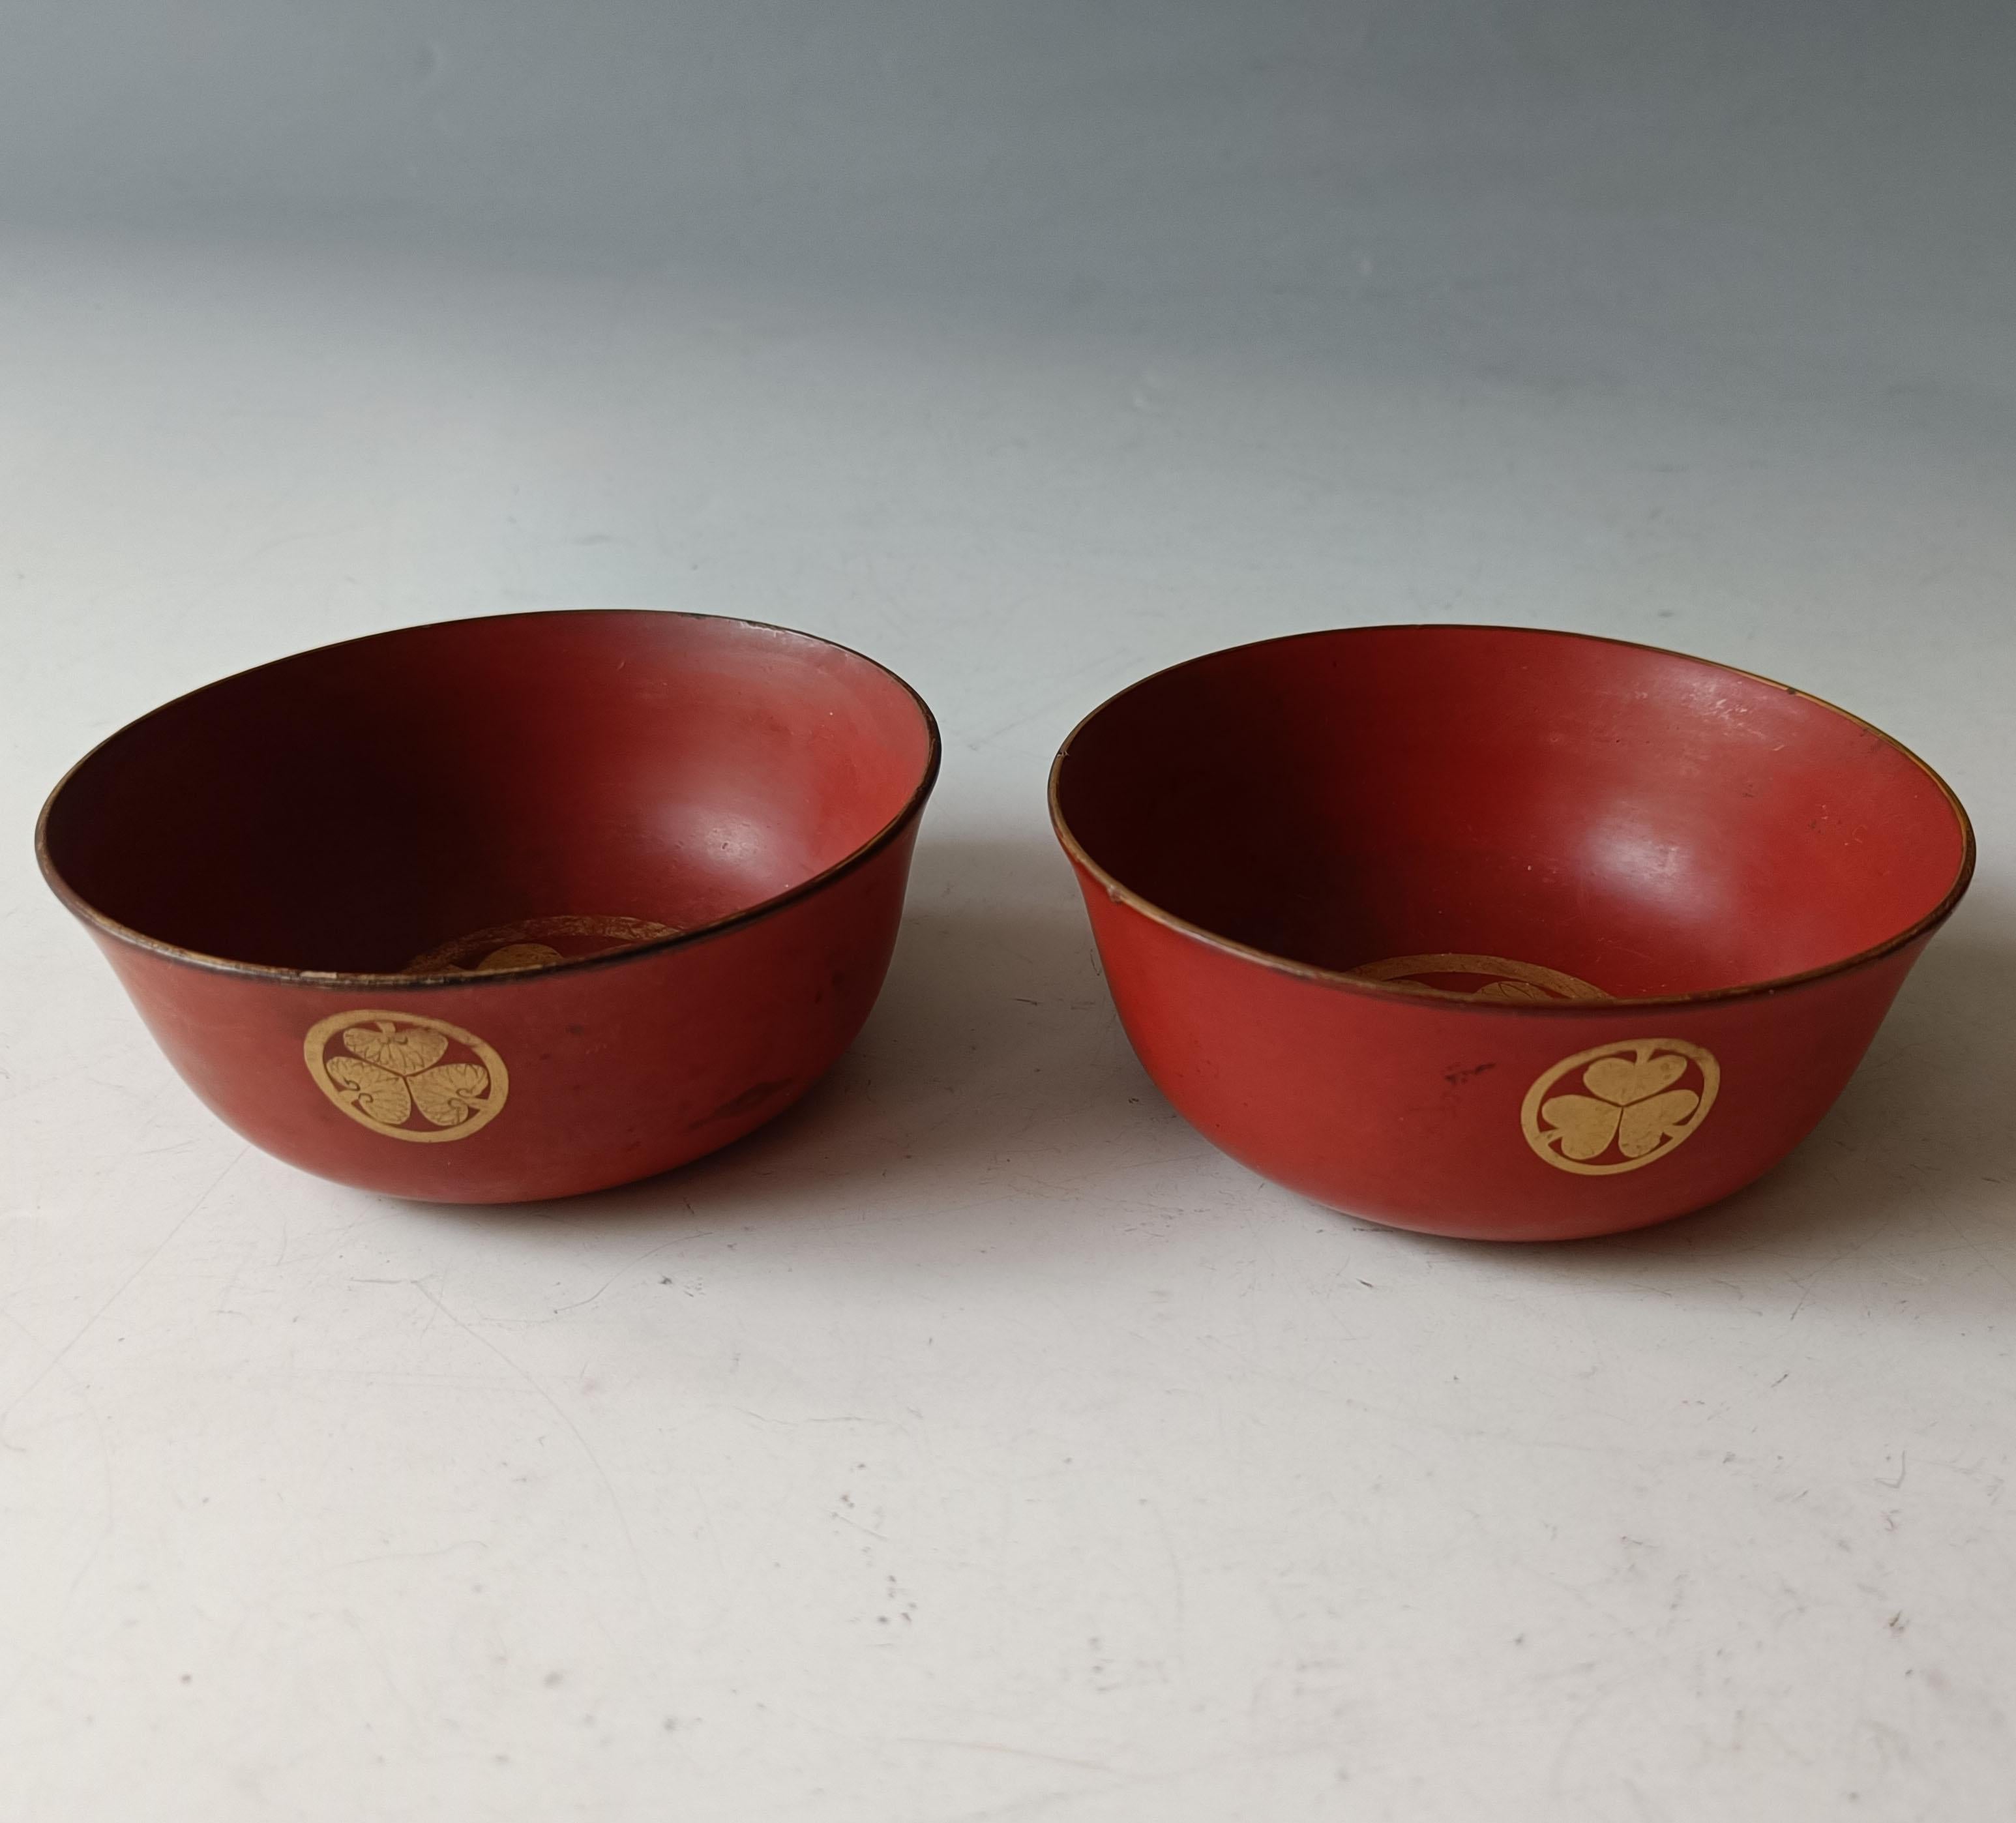 Fine Pair Japanese Lacquered Wood Bowls 19th Century Meiji
Beautiful and elegant example of Japanese lacquer ware with and gold gilt, Rice bowls with leaf motives in gold
Circa / 19th century 

Condition: Good with expected wear.
Ex UK collection.

